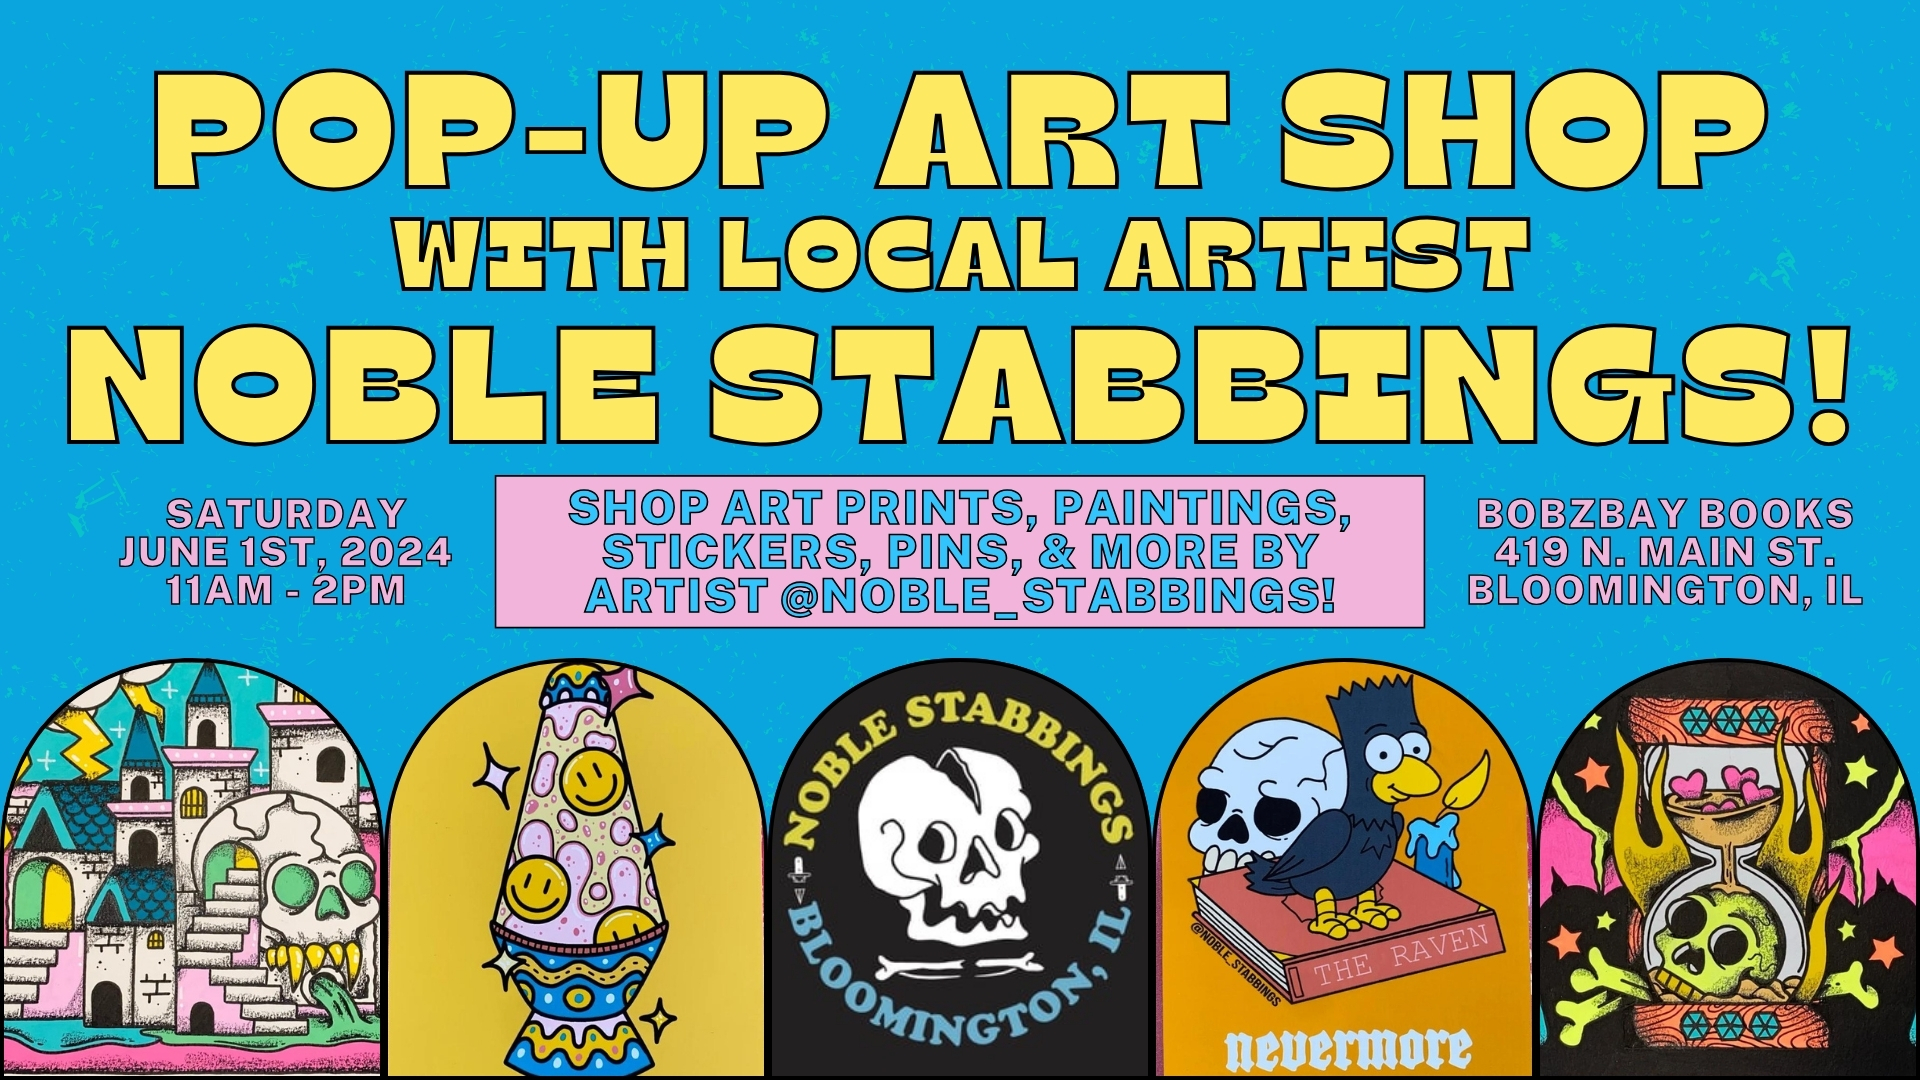 Pop-Up Art Shop with Local Artist Noble Stabbings at Bobzbay Books